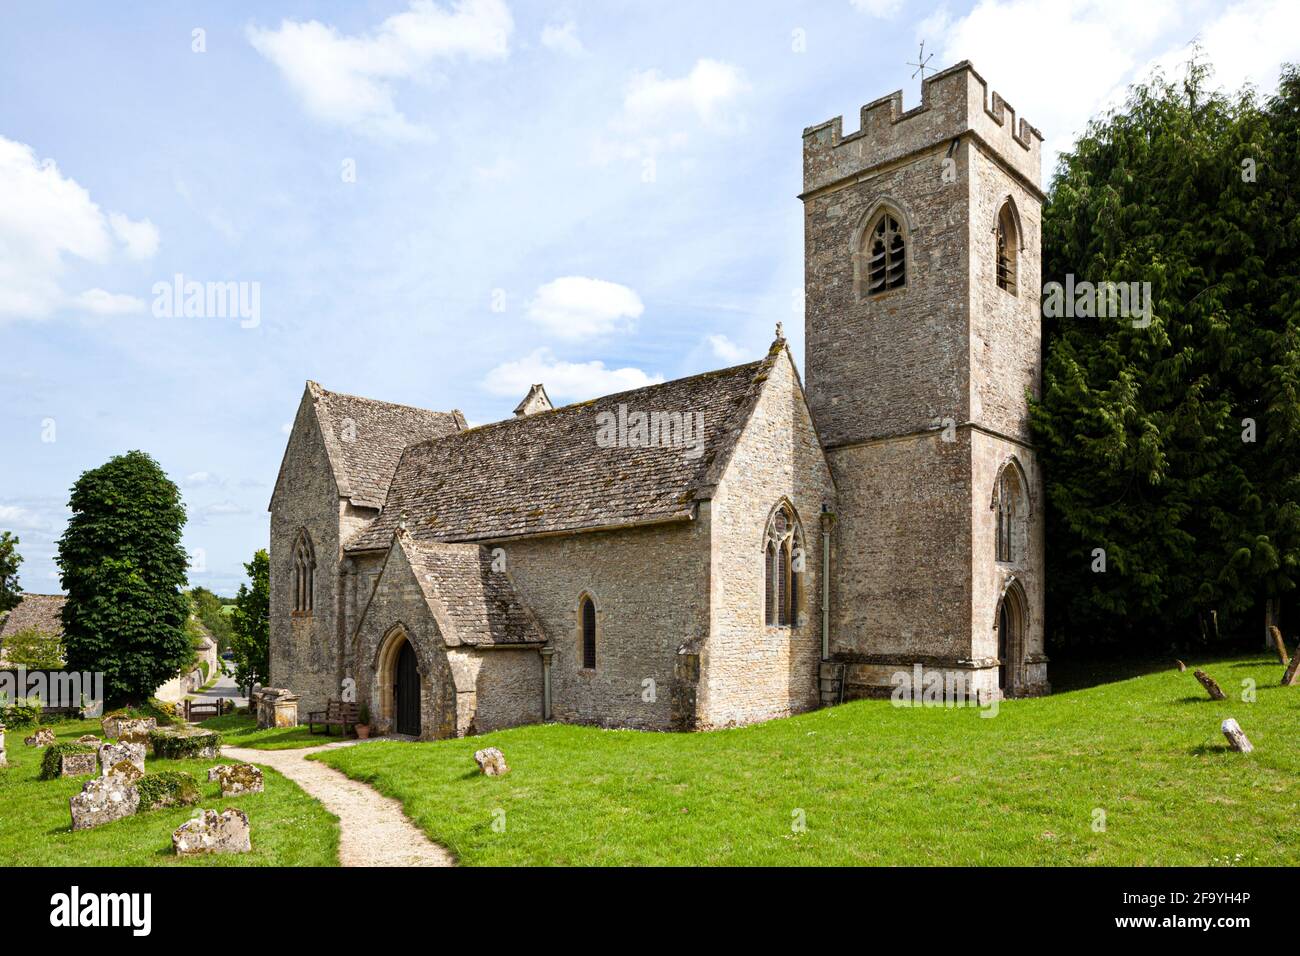 The Norman church of St Nicholas in the Cotswold village of Asthall, Oxfordshire UK Stock Photo